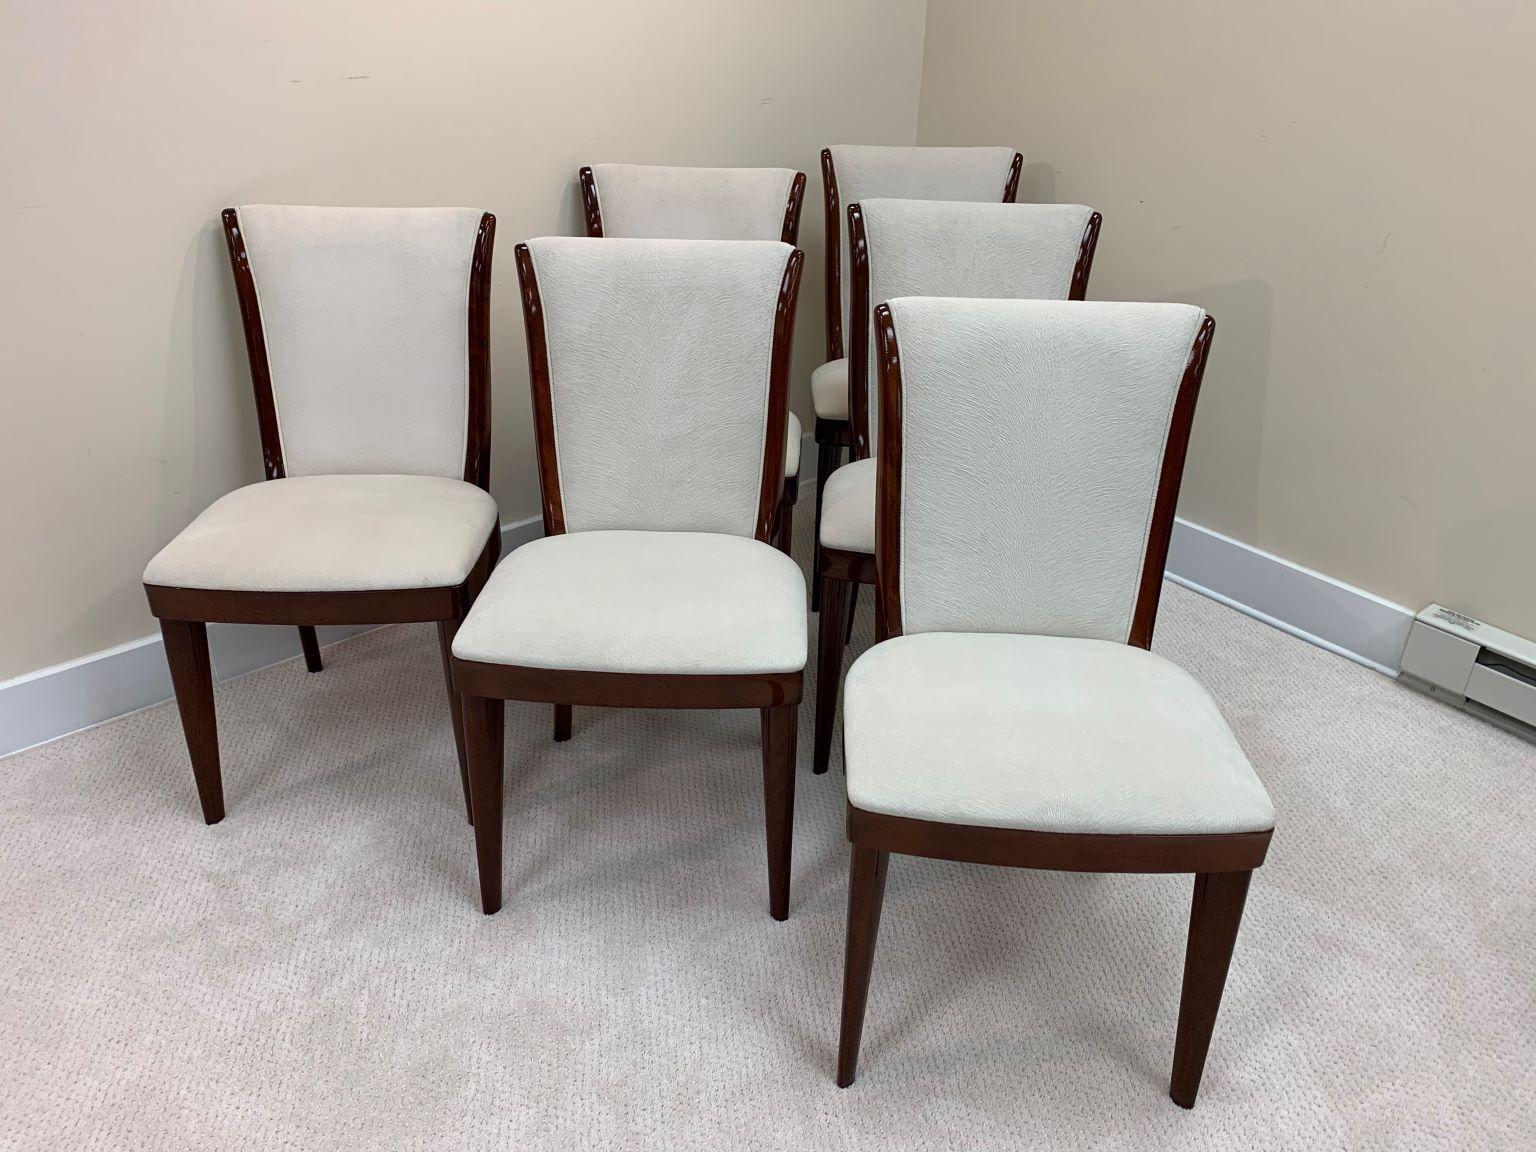 20th Century French Style Art Deco Streamline Set of Six Dining Chairs, circa 1930s